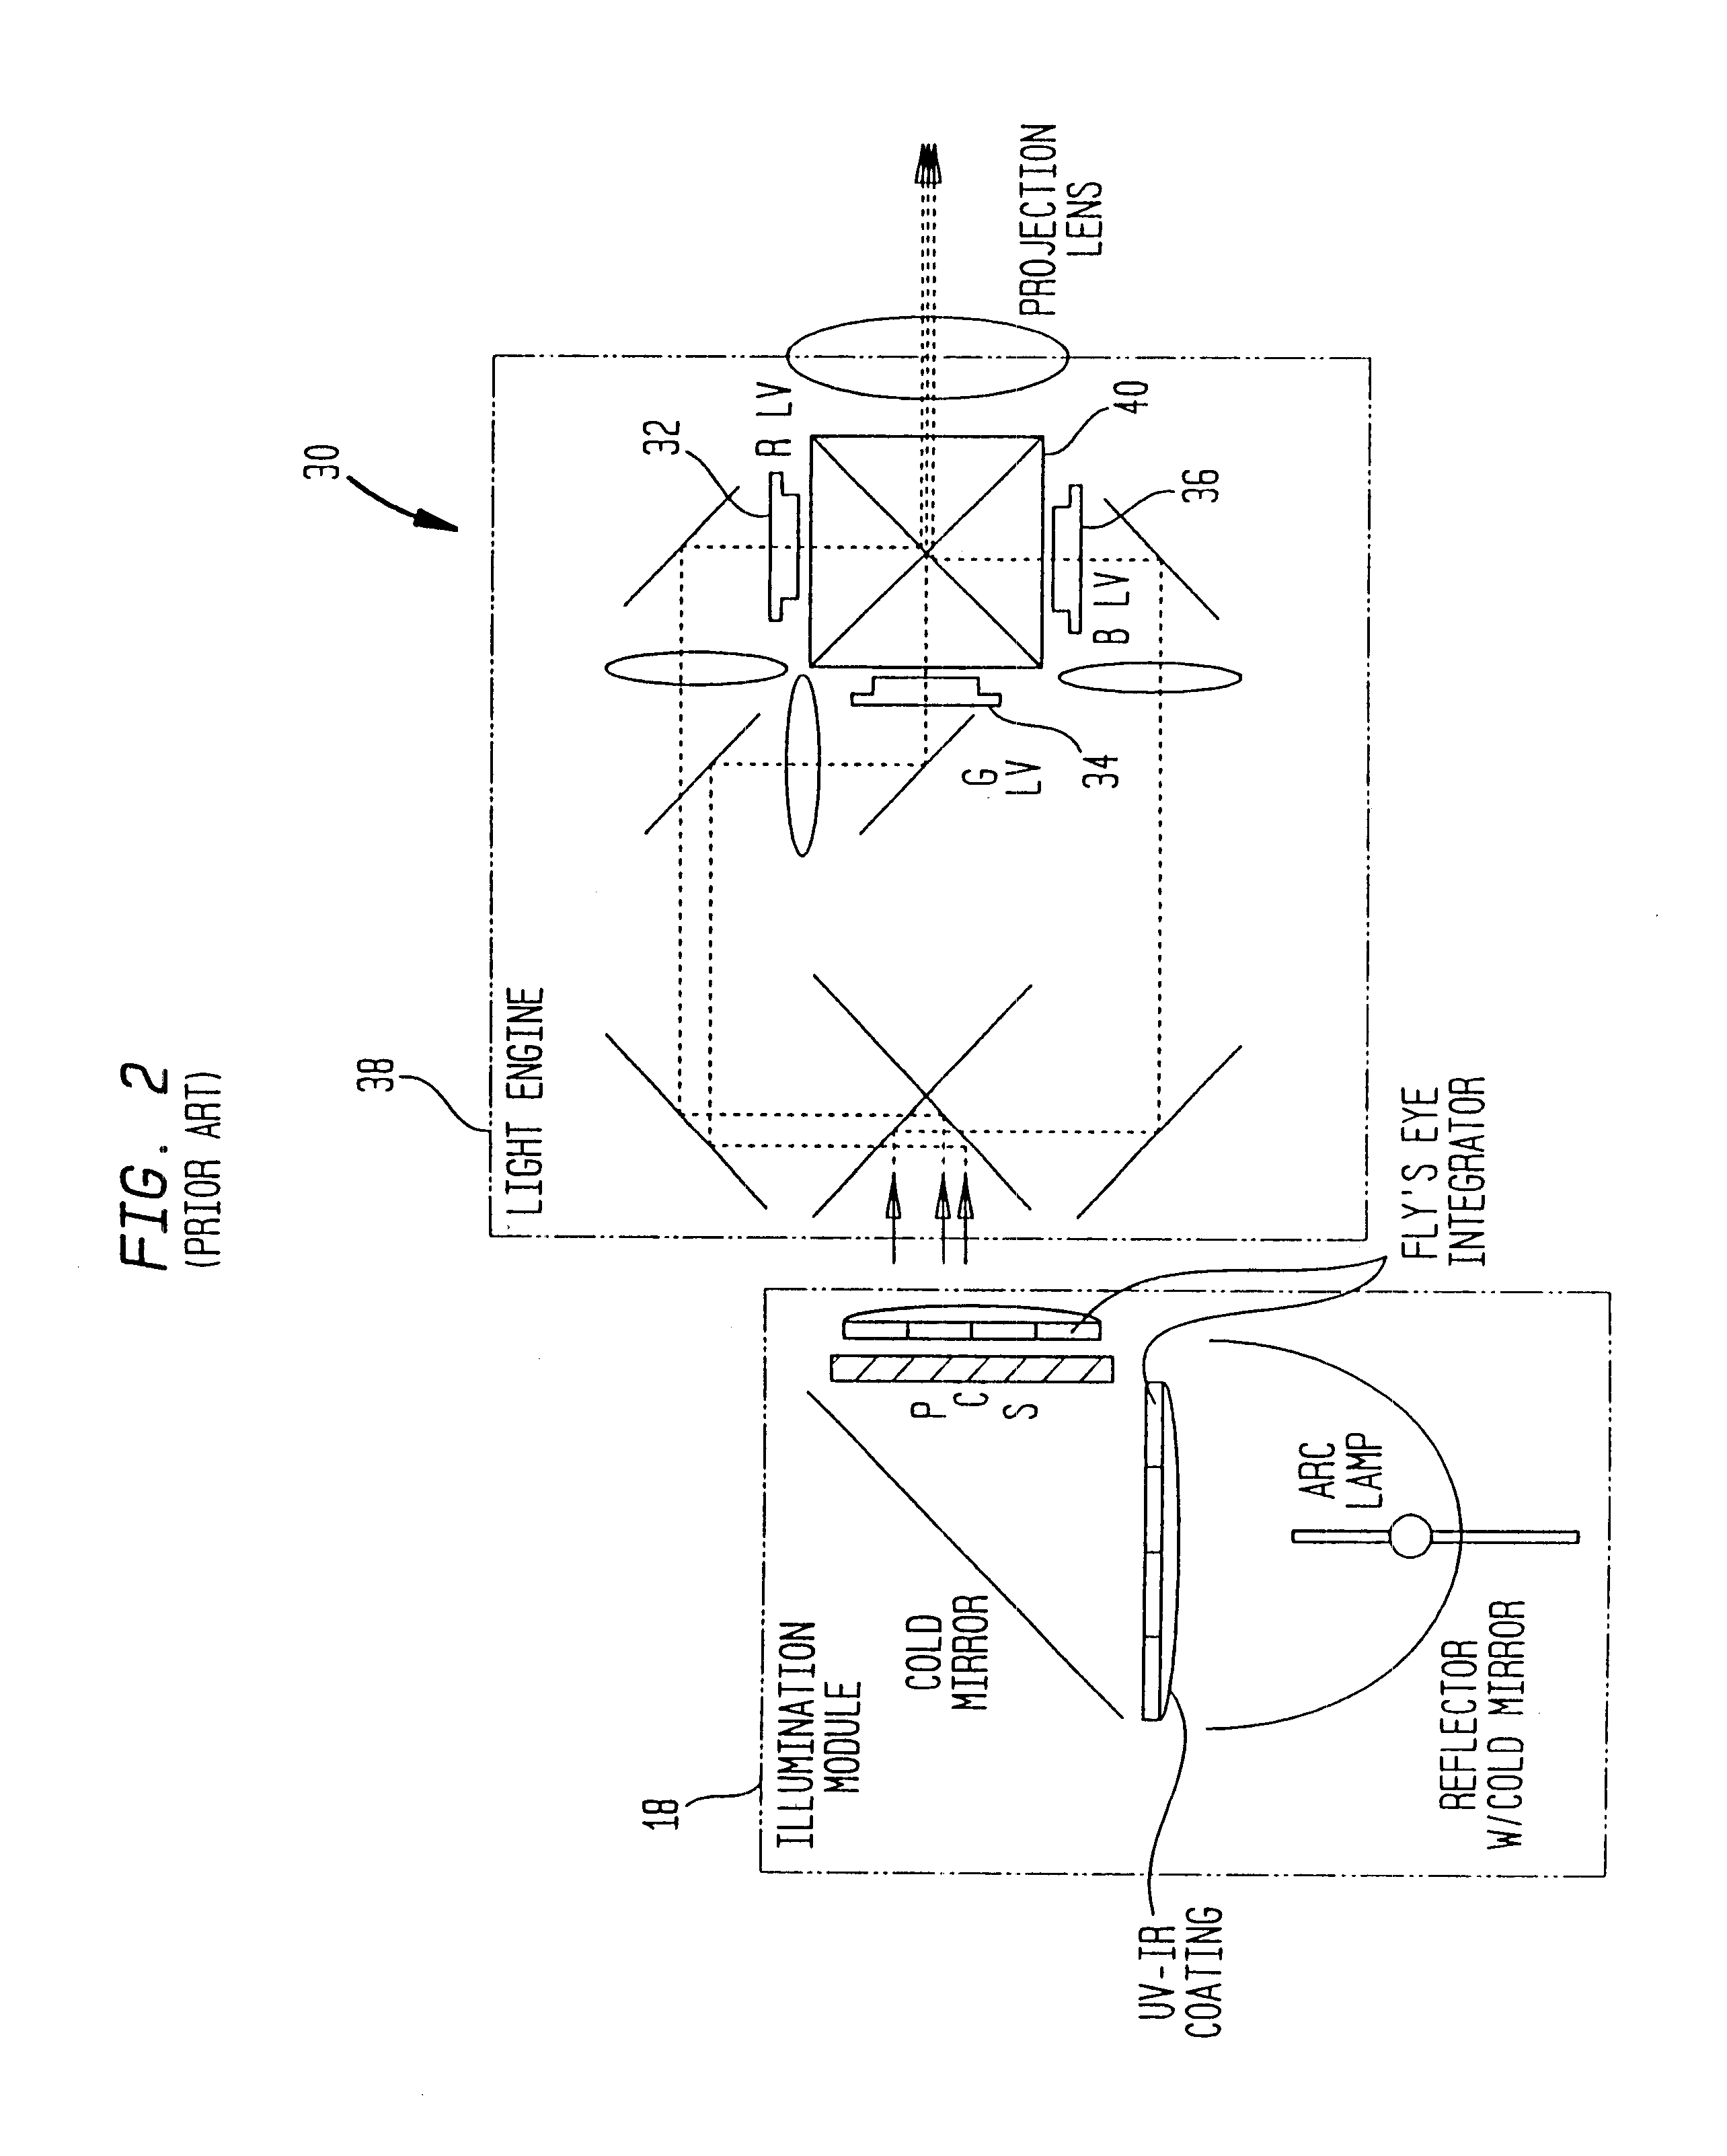 System for the automatic adaptation of projector images and a method for the implementation thereof